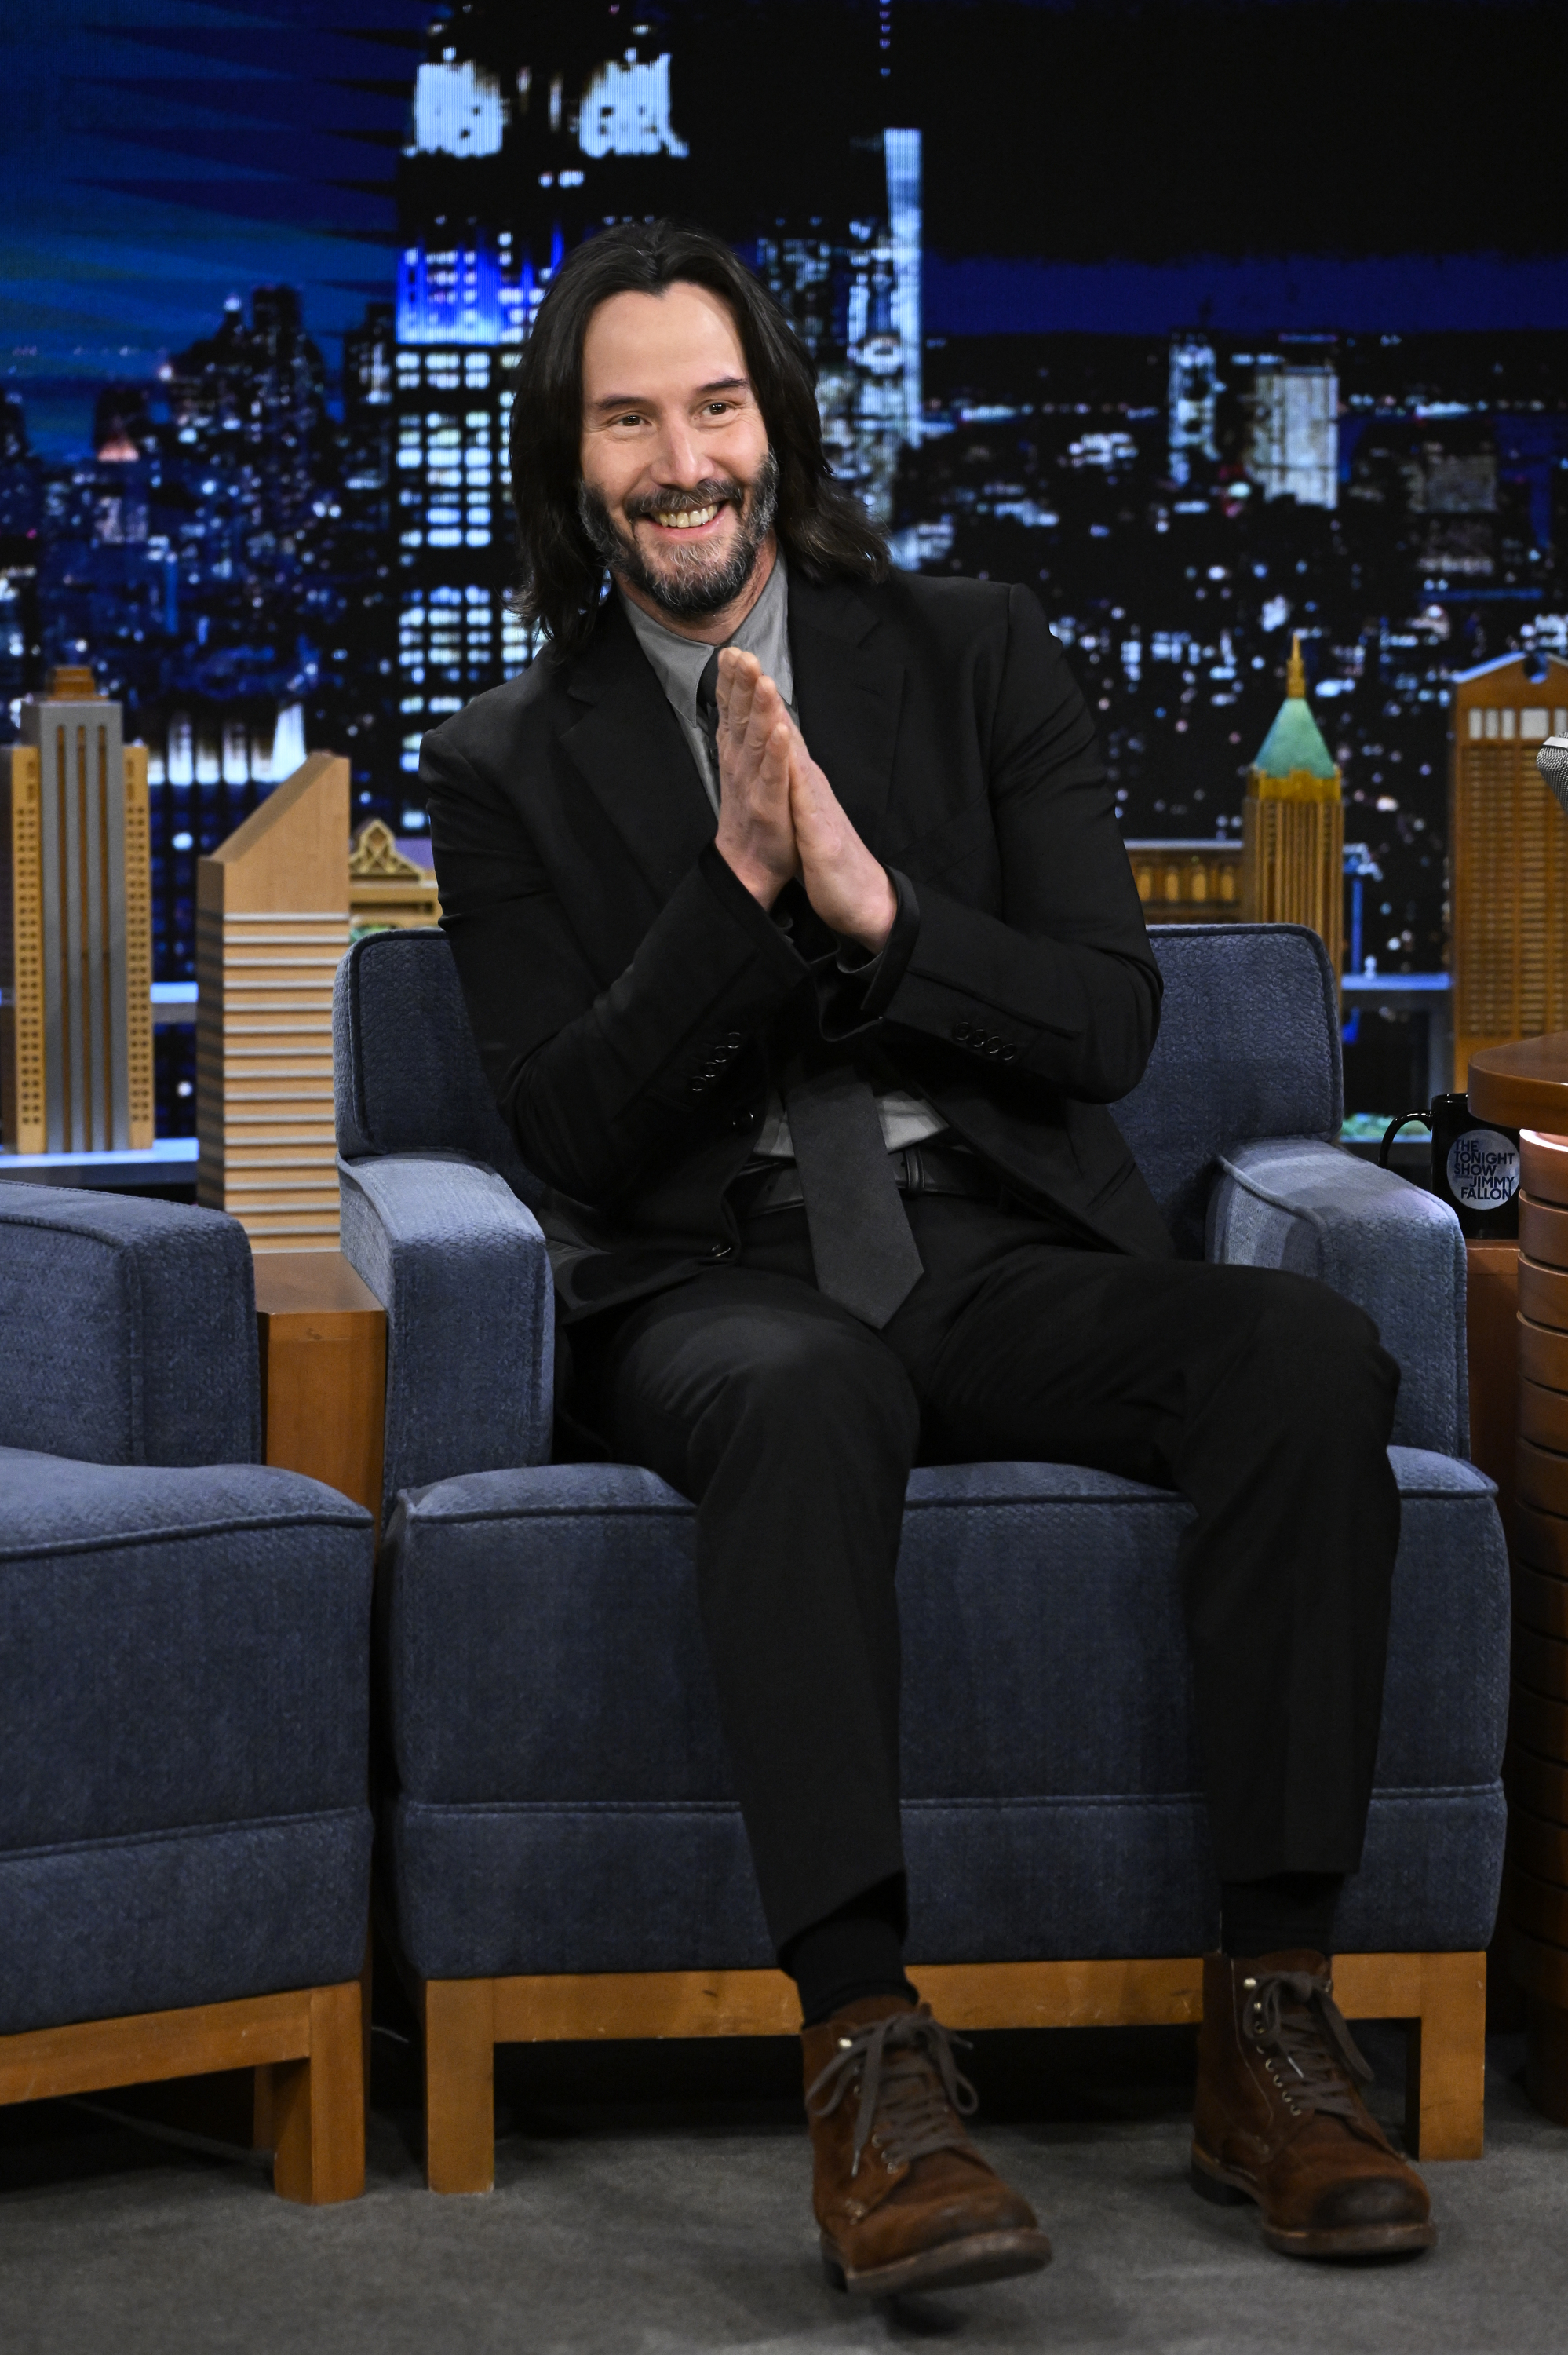 Keanu Reeves on an episode of "The Tonight Show Starring Jimmy Fallon" on March 16, 2023 | Source: Getty Images